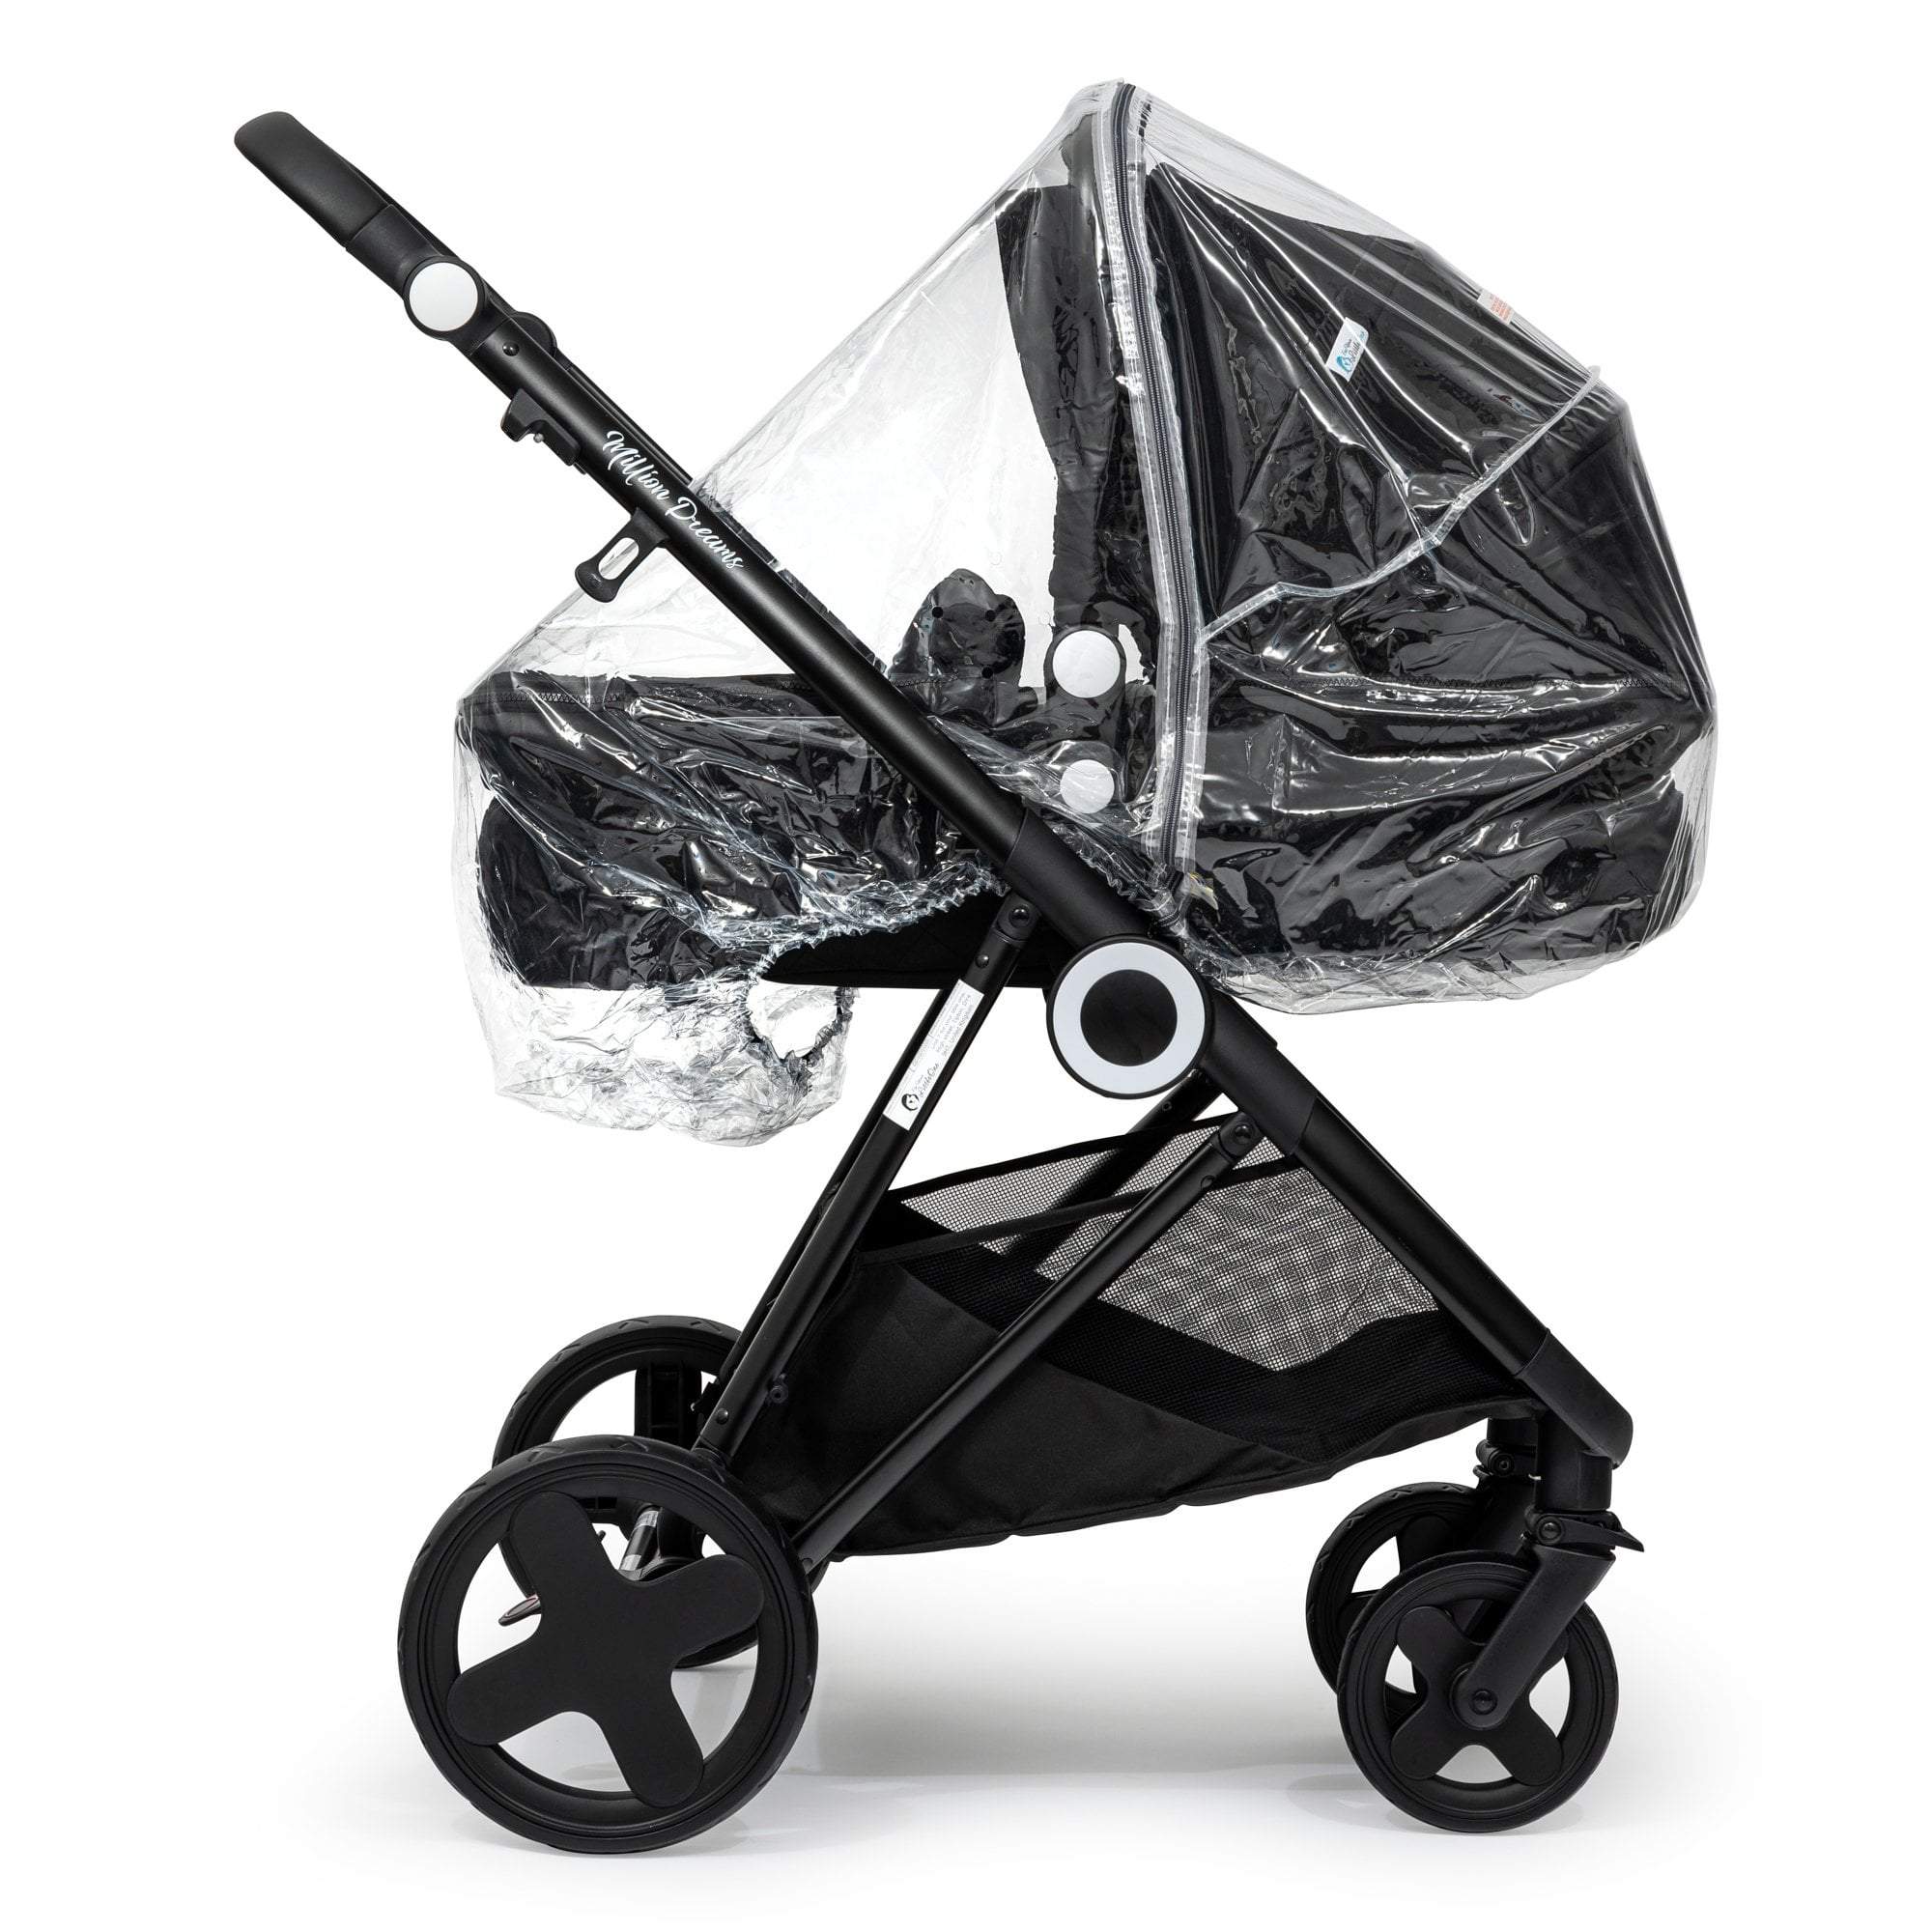 Carrycot Raincover Compatible With DoBuggy - Fits All Models - For Your Little One